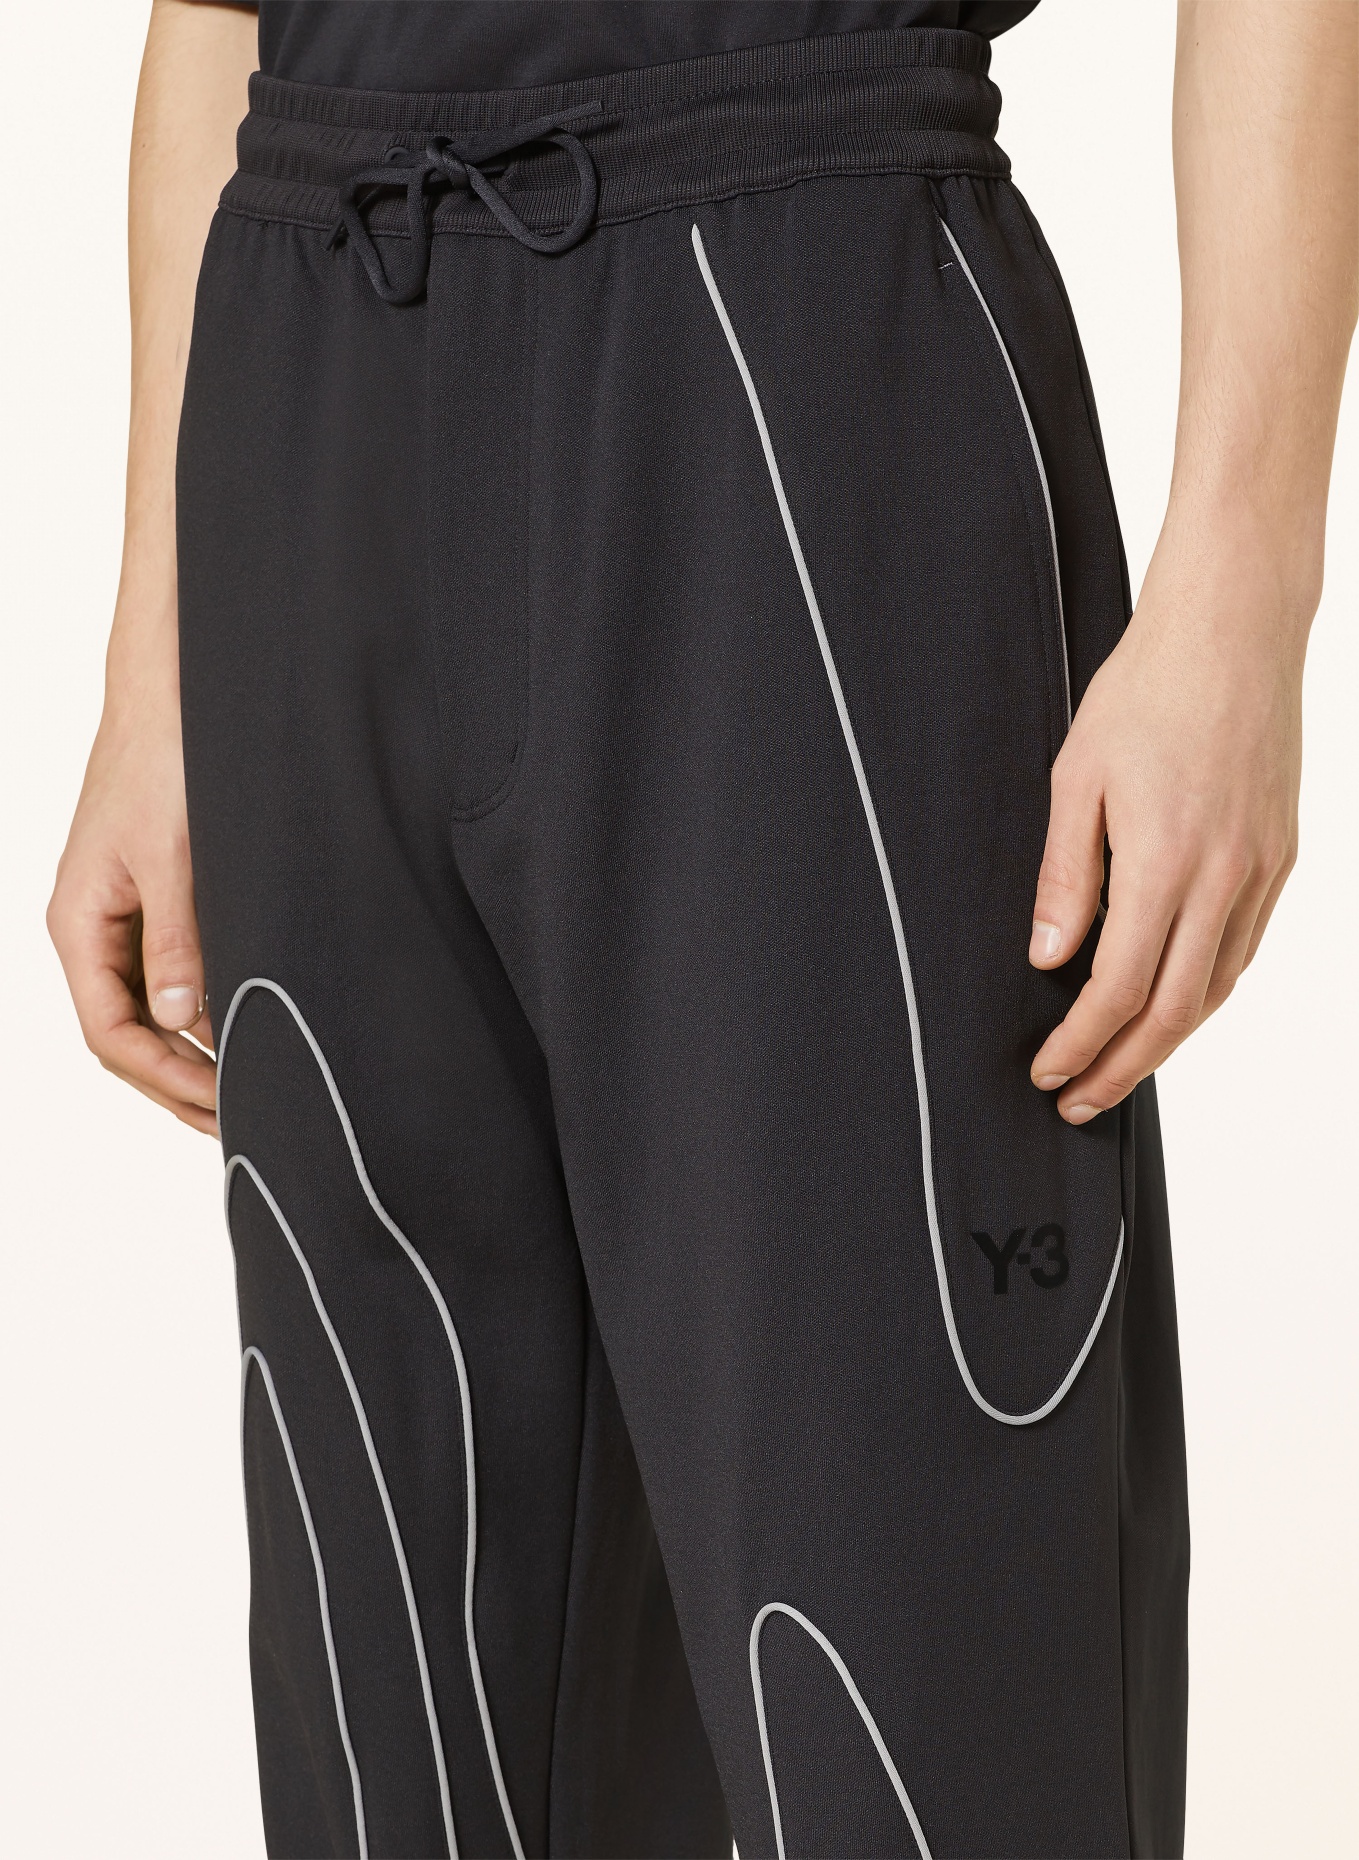 Y-3 Pants in jogger style, Color: BLACK (Image 5)